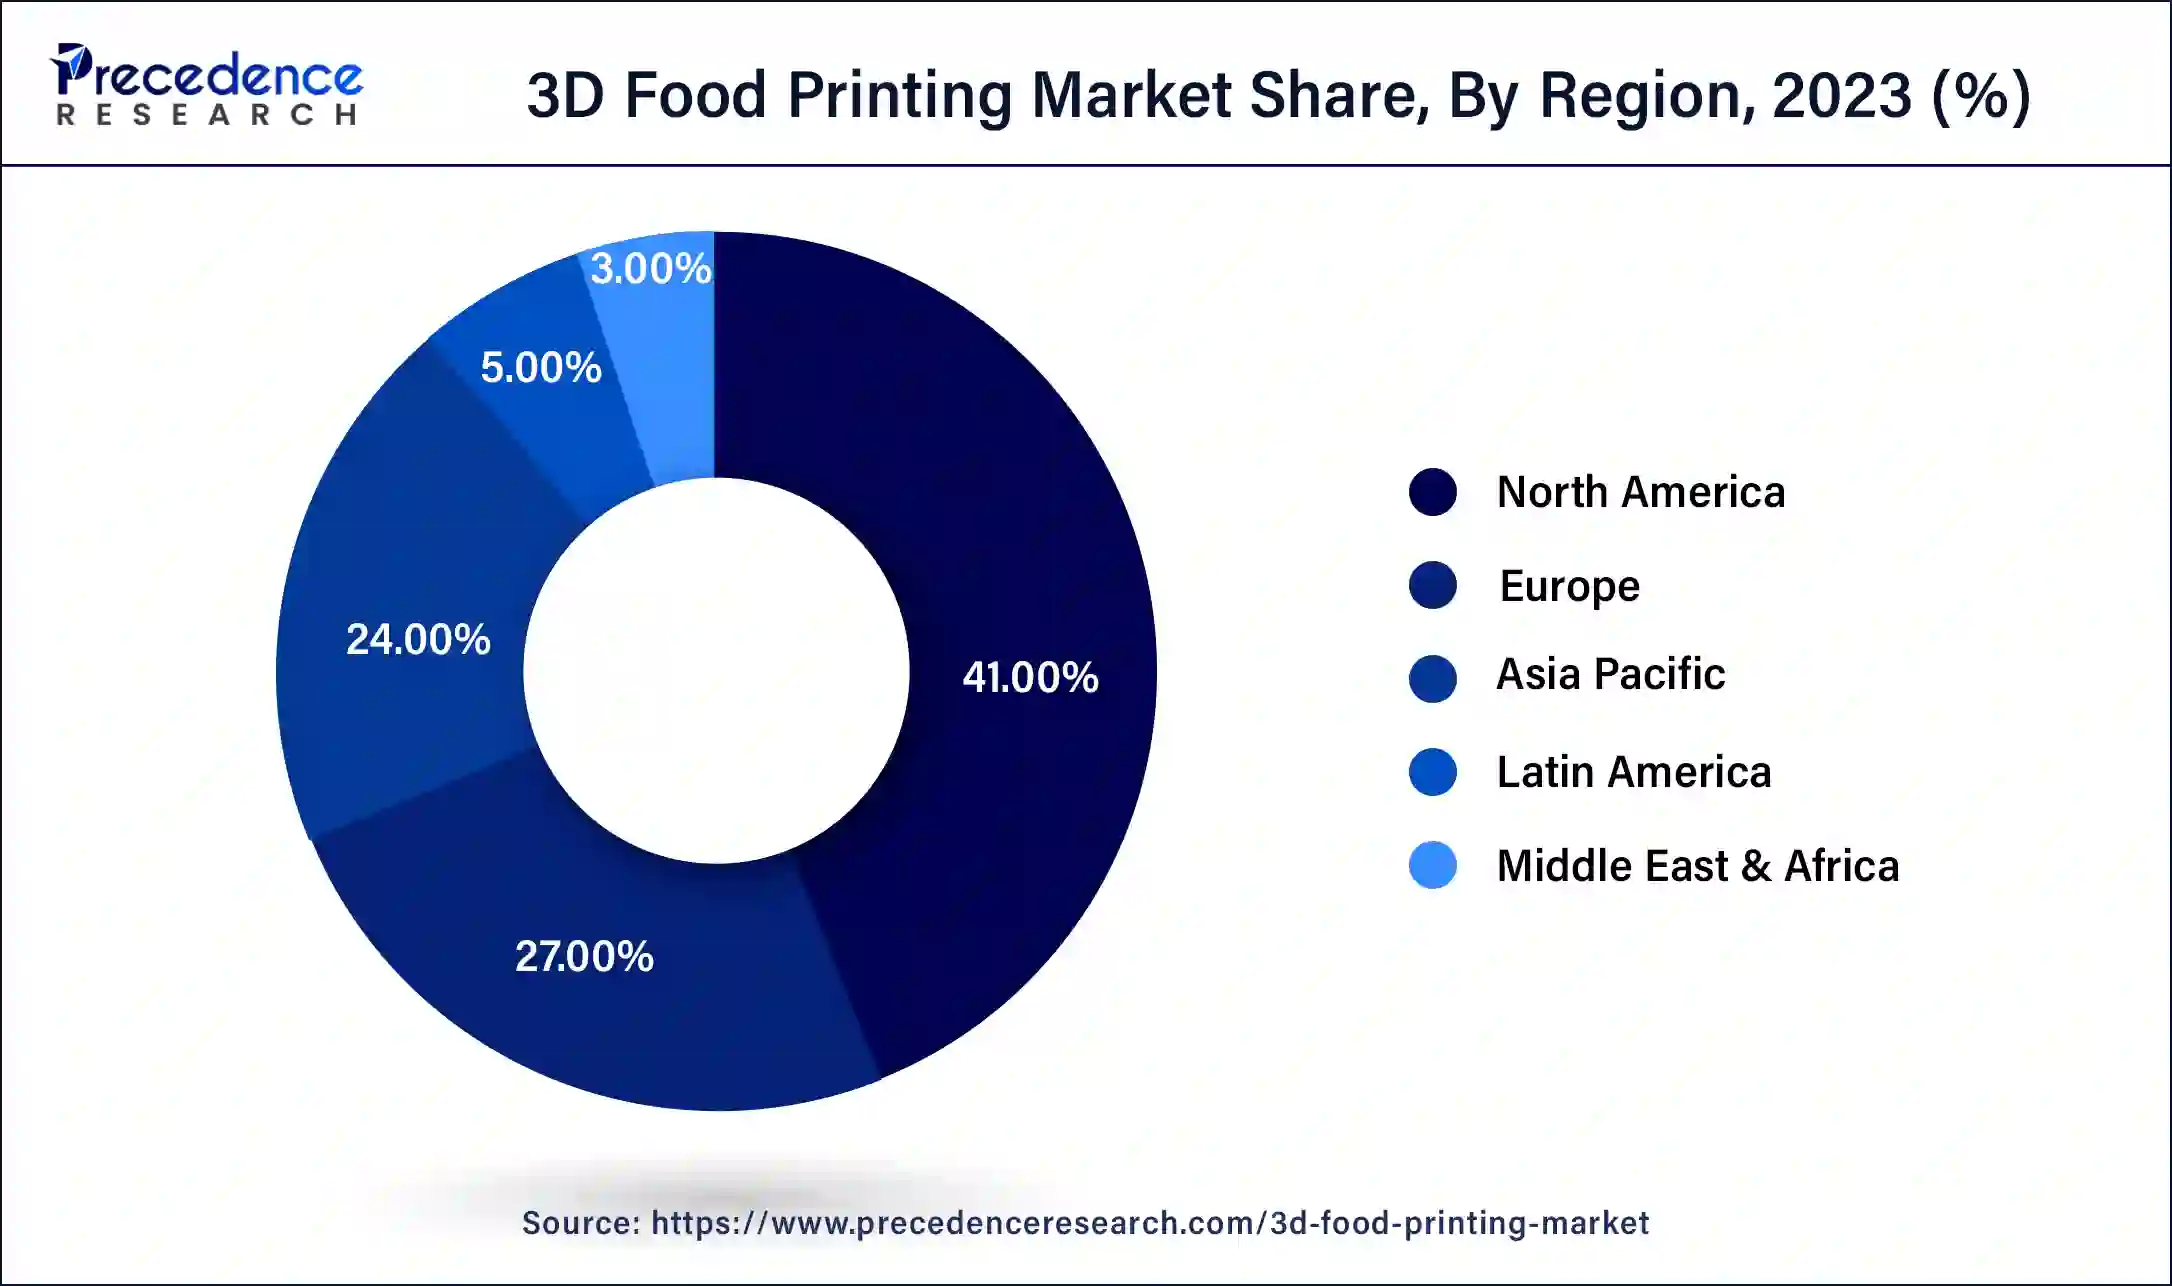 3D Food Printing Market Share, By Region, 2023 (%)